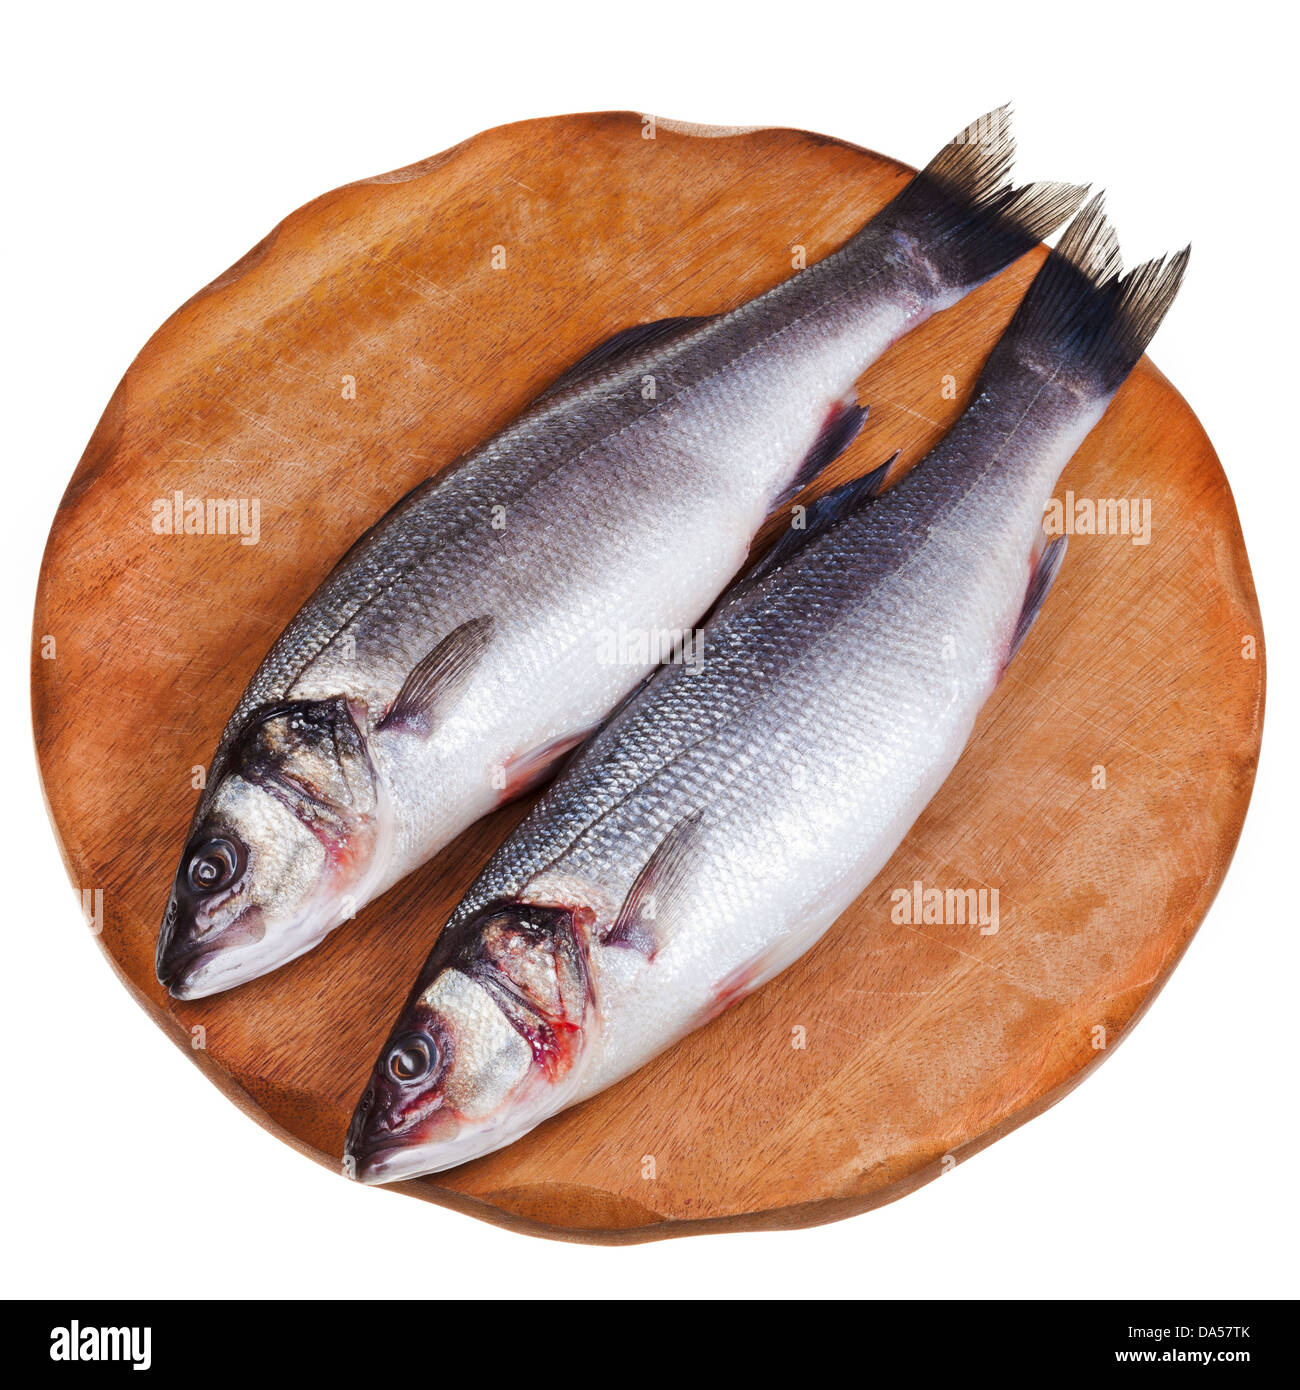 two raw sea bass fish on wooden board isolated on white background Stock Photo